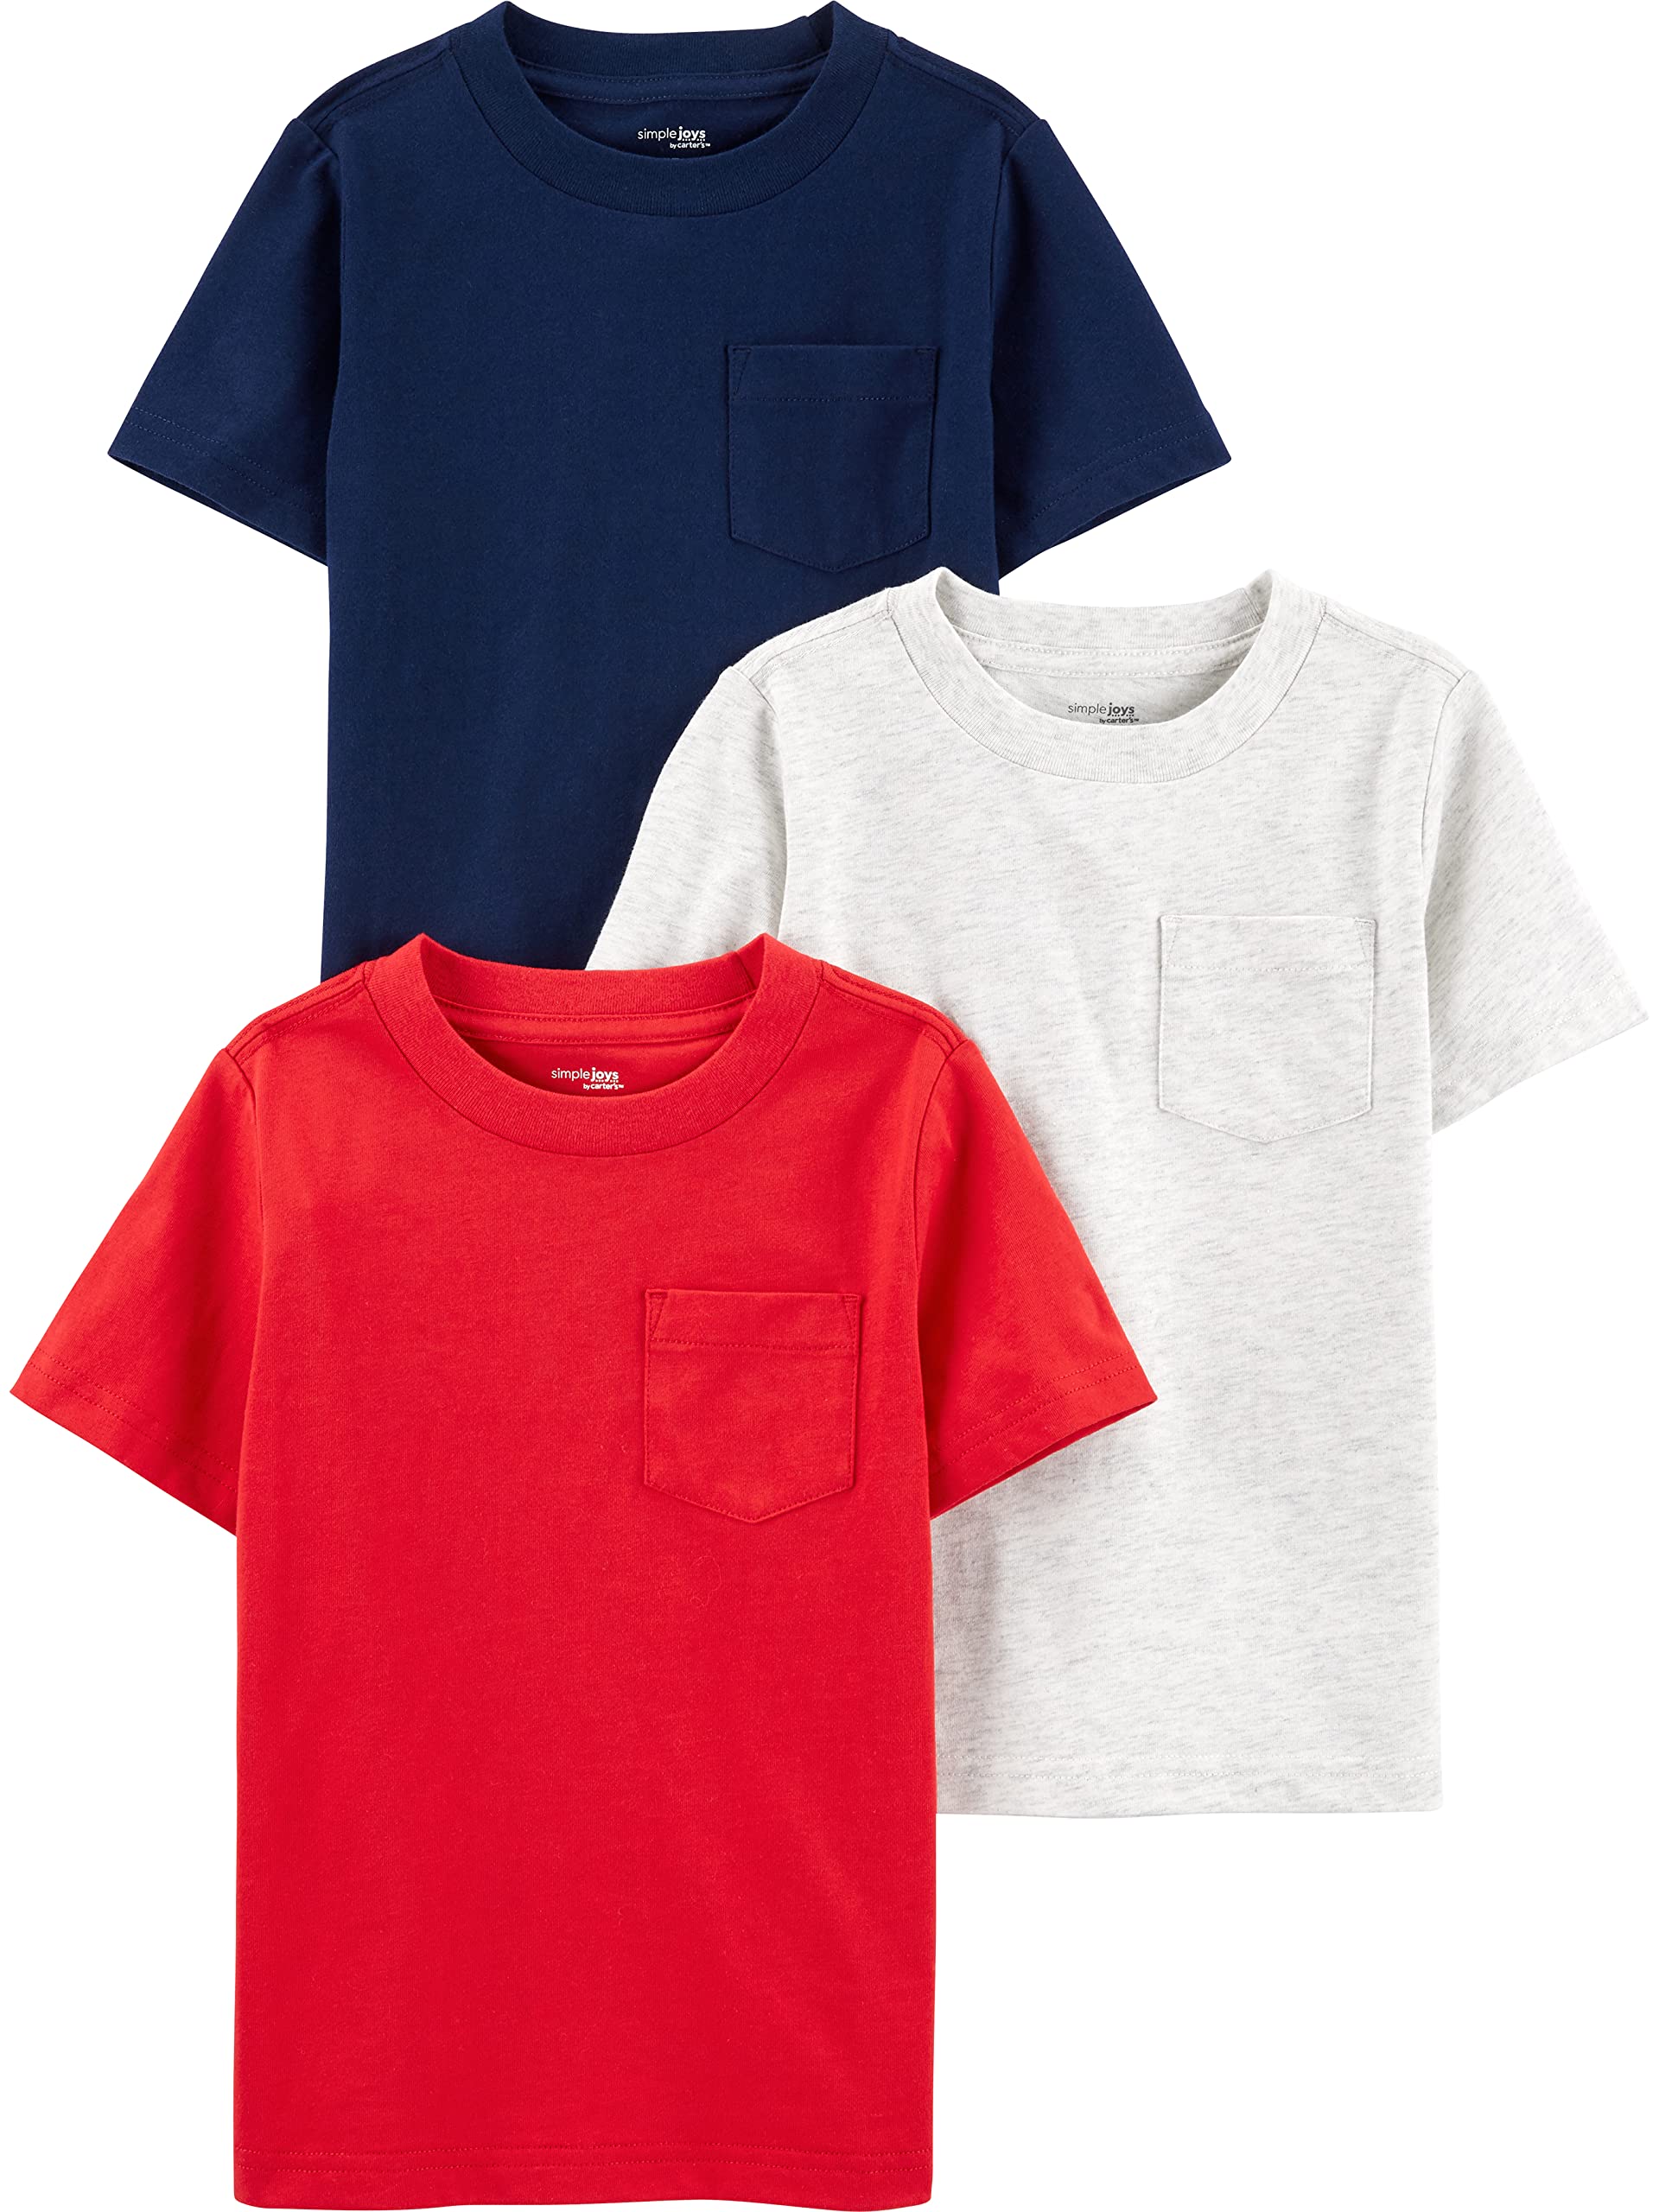 Simple Joys by Carter's Babies, Toddlers, and Boys' Solid Pocket Short-Sleeve Tee Shirts, Pack of 3